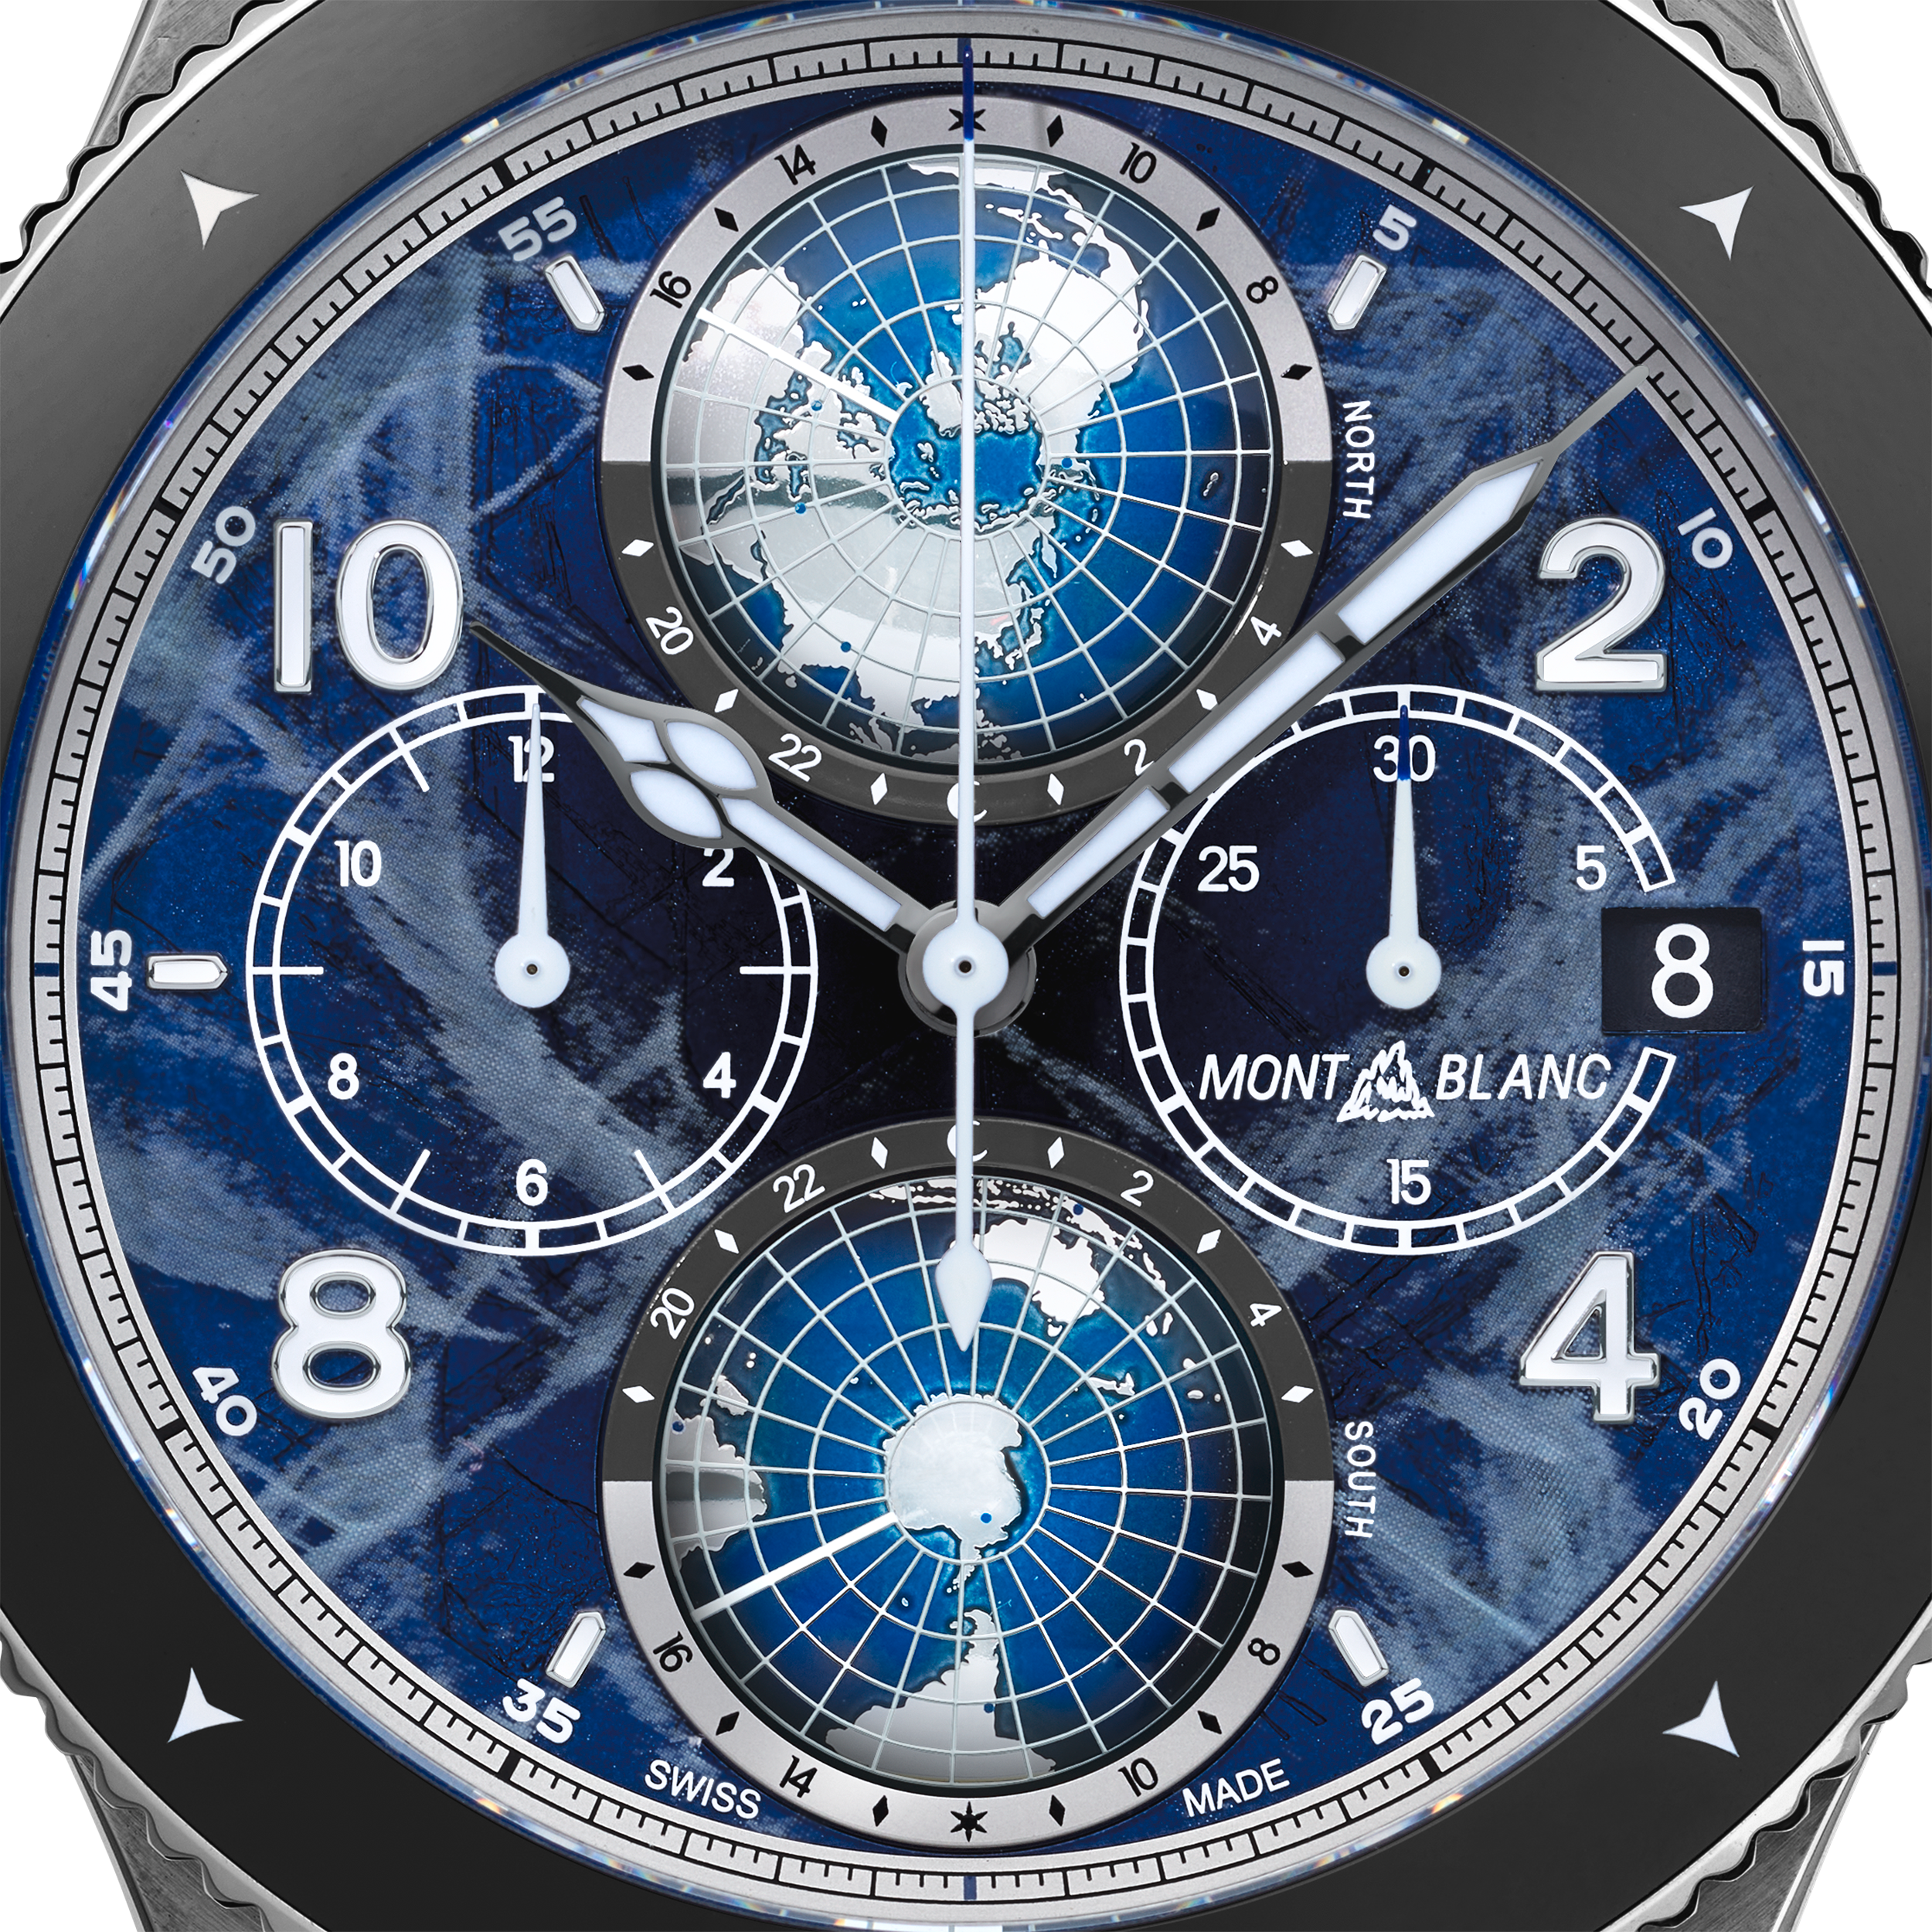 Montblanc 1858 Geosphere Chronograph 0 Oxygen Limited Edition - 290 pieces, image 4